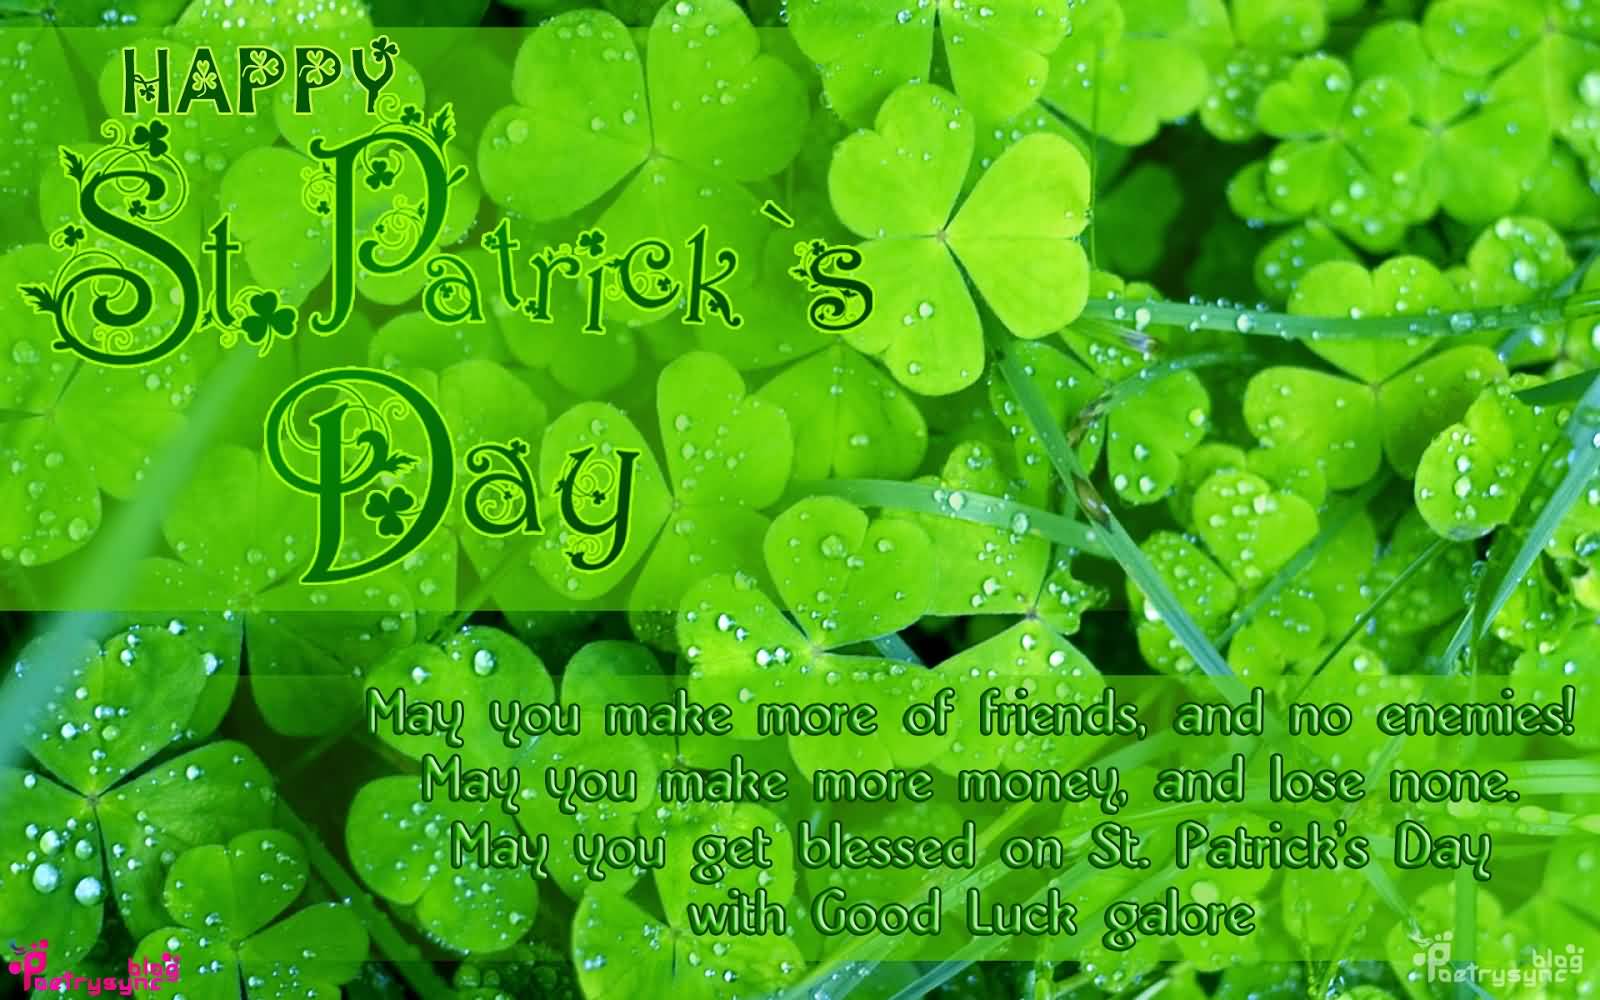 Happy Saint Patrick's Day Greetings Picture